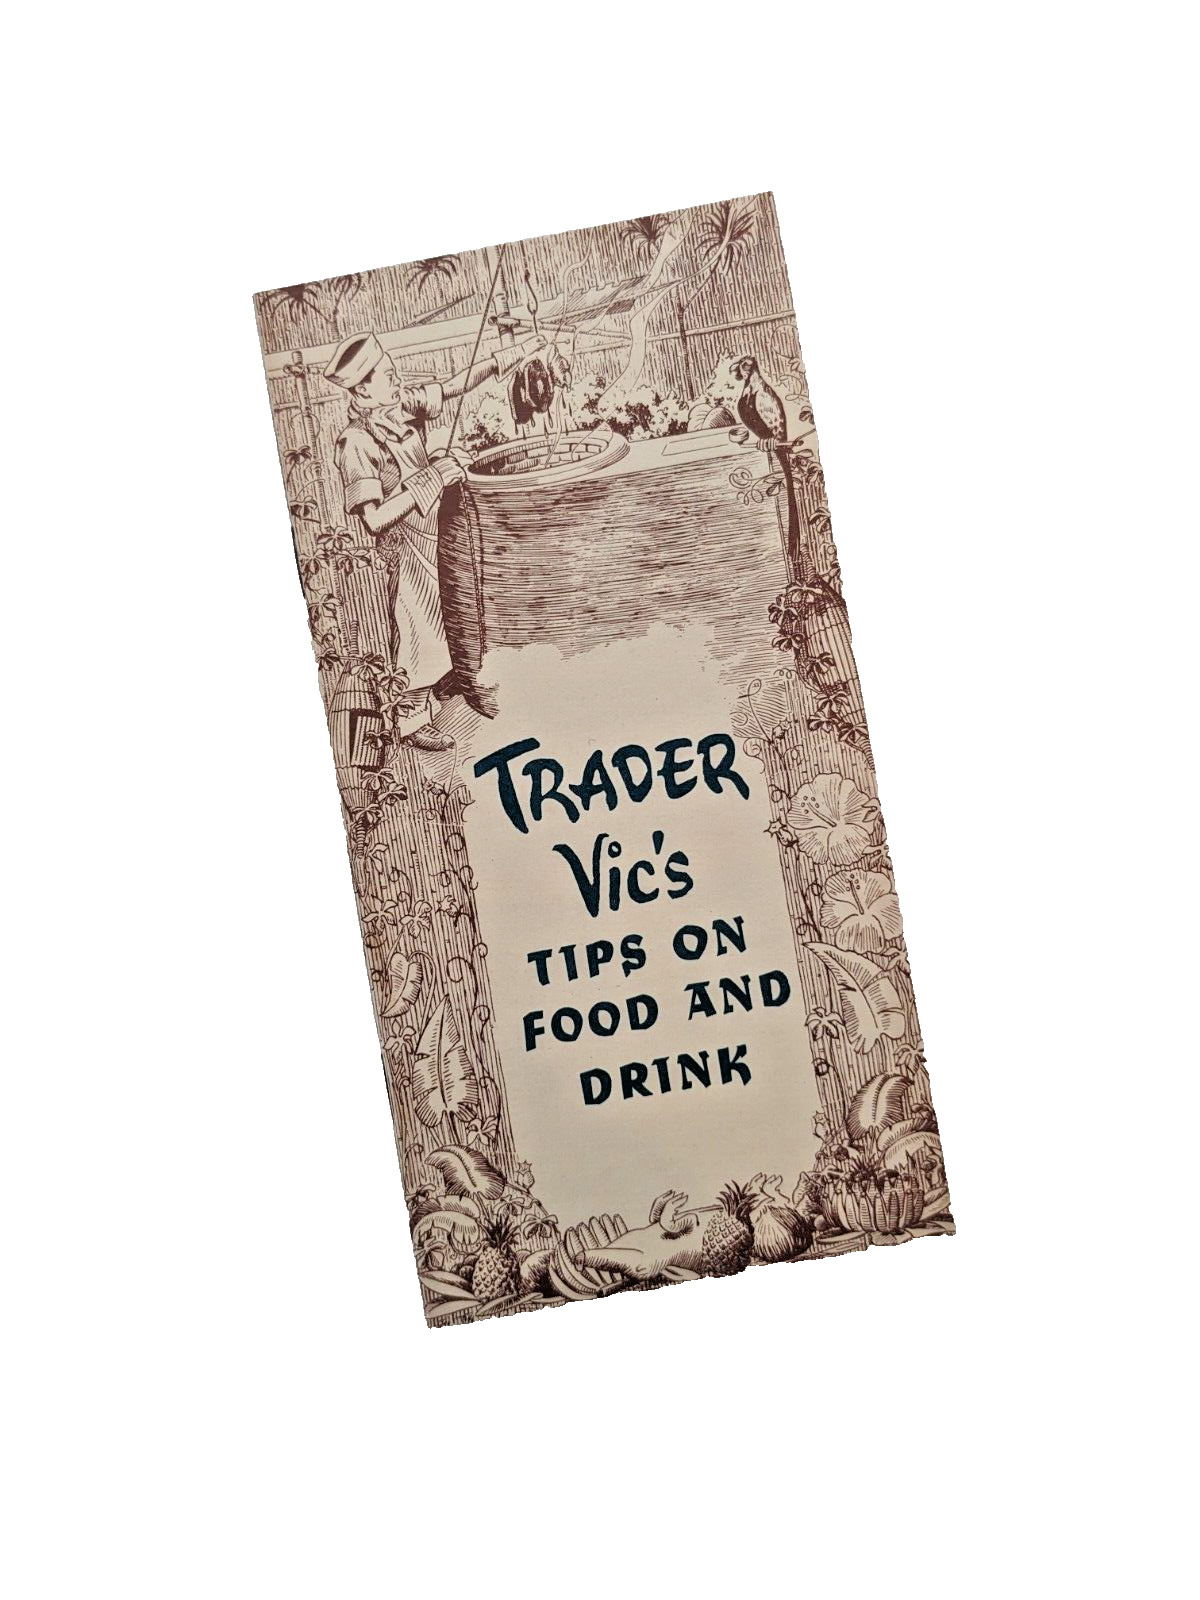 VINTAGE TRADER VIC\'S - TIPS ON FOOD AND DRINK / PARTY GUIDE/ COCKTAILS / RECIPES